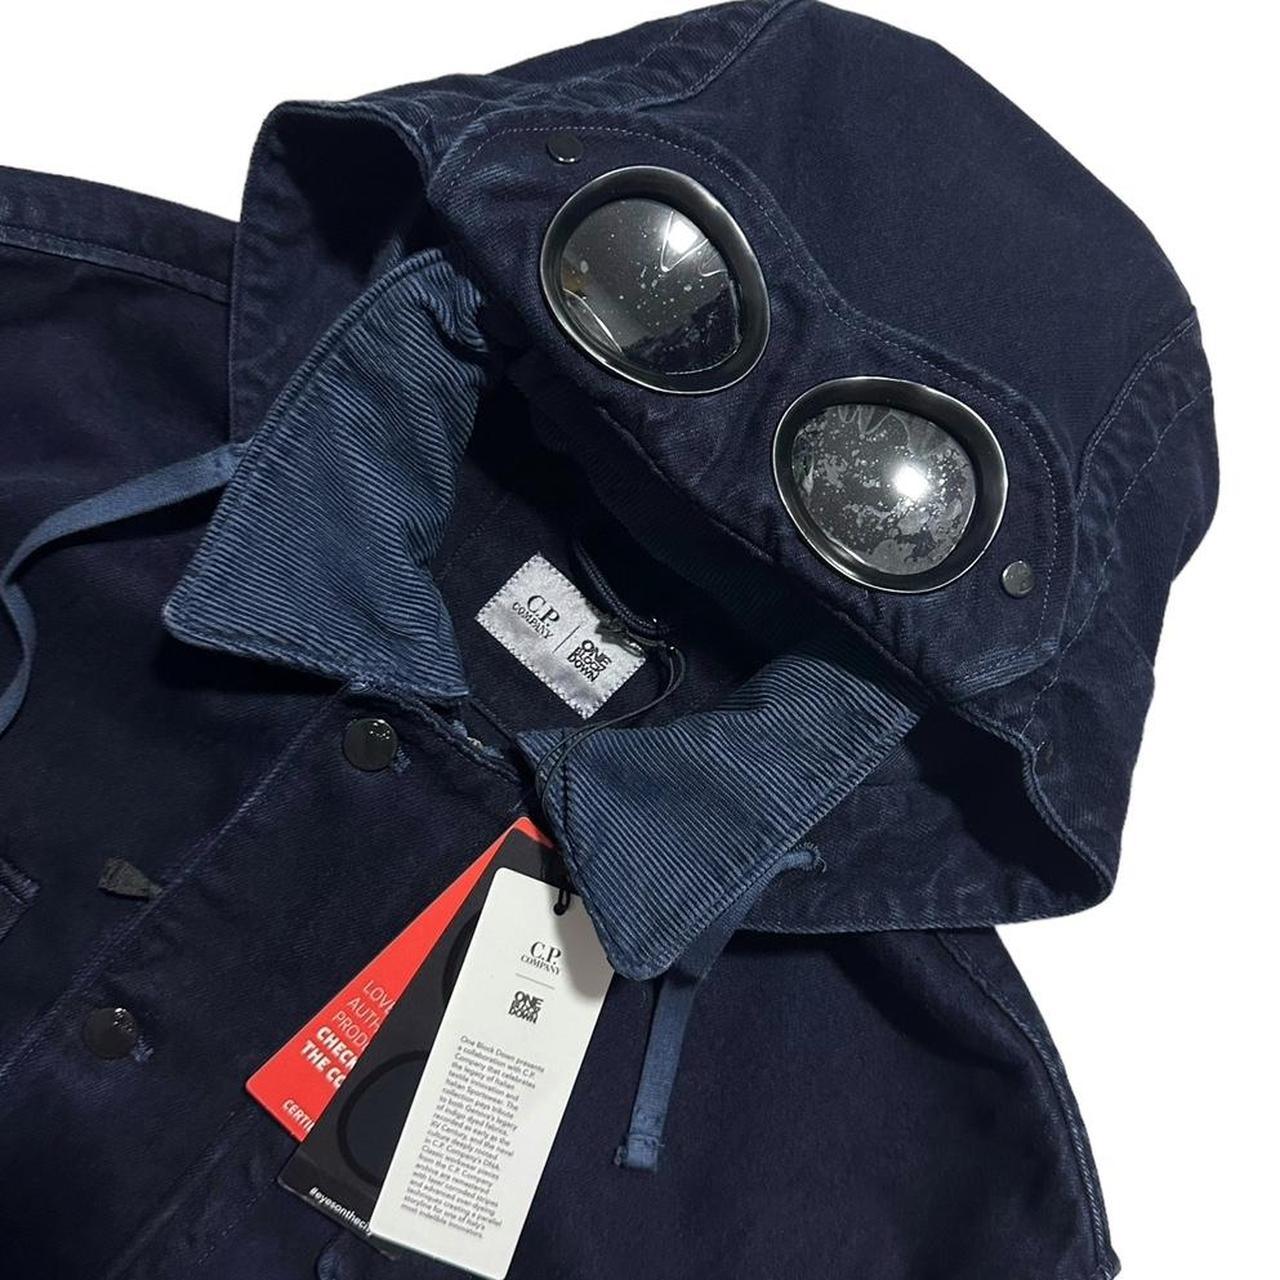 CP Company One Block Down Goggle Jacket - Known Source